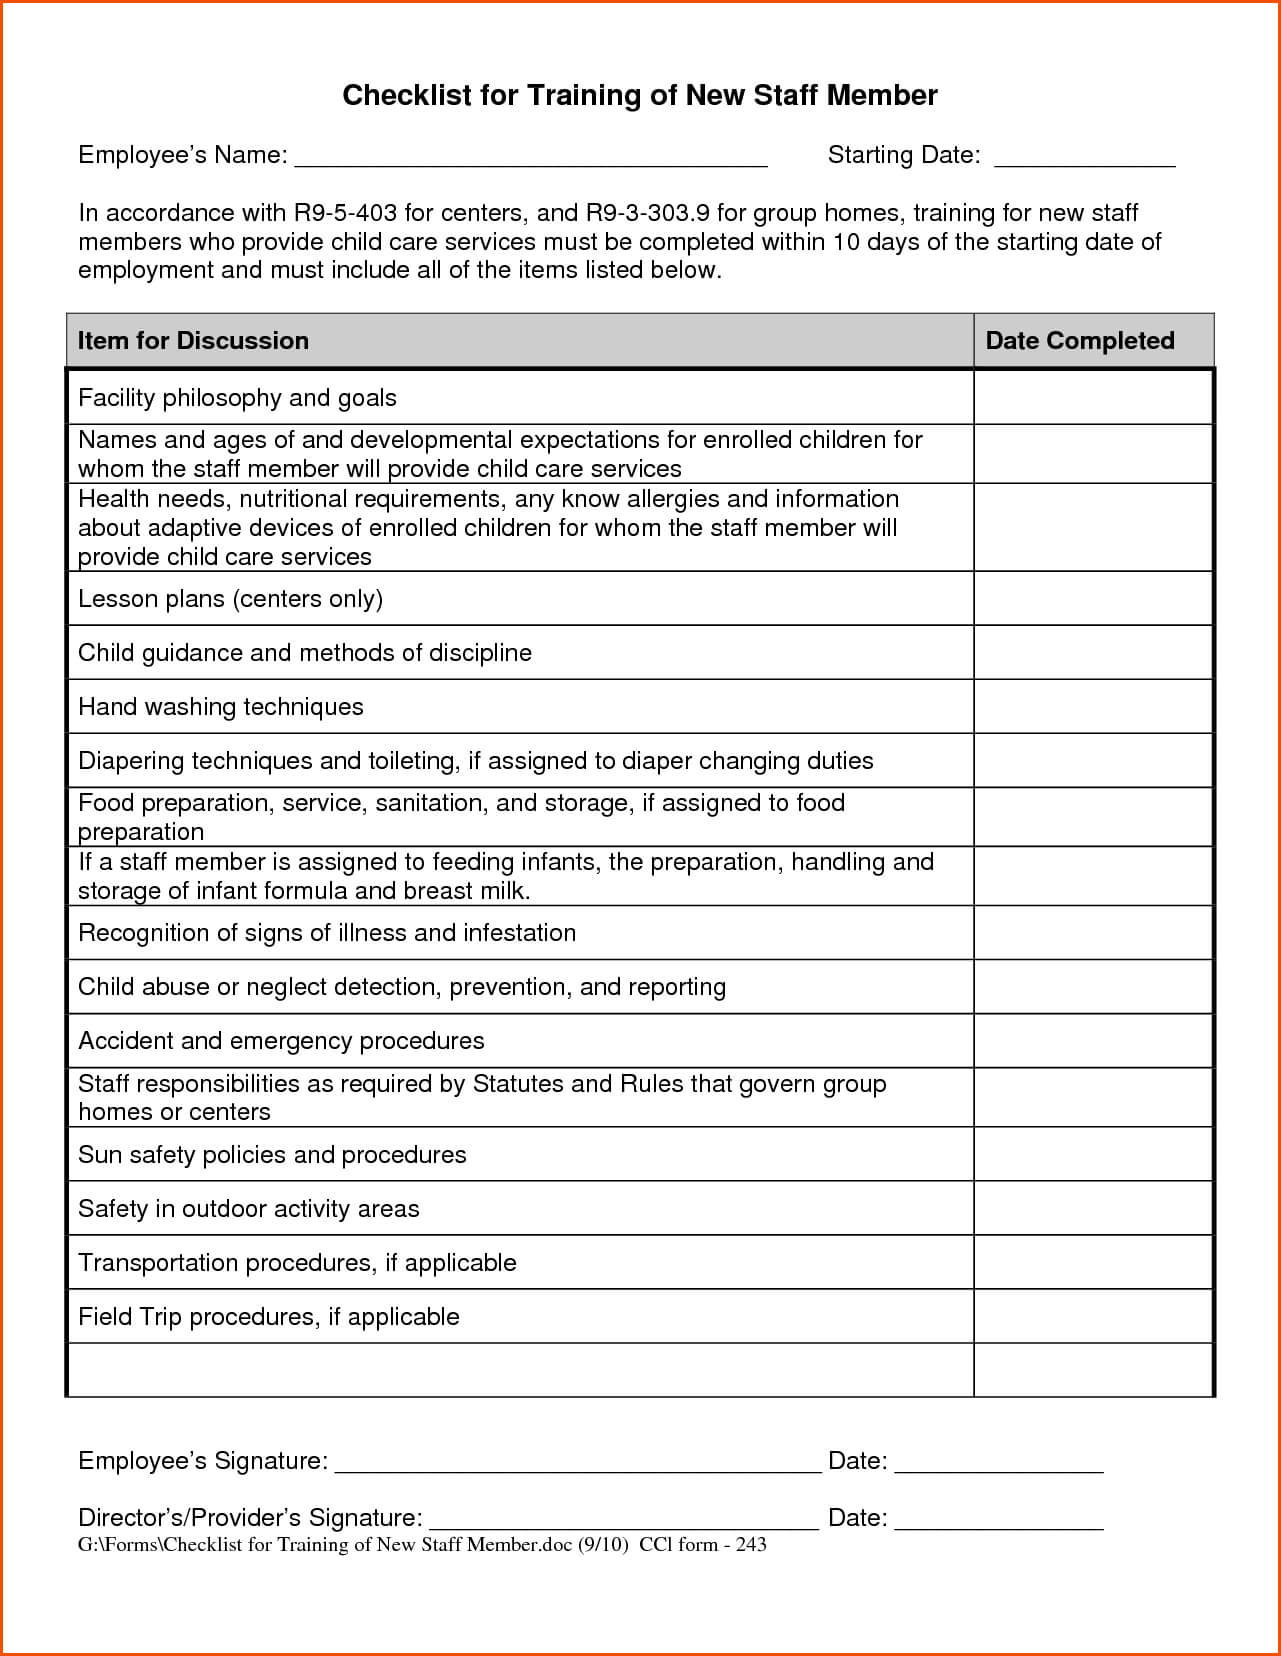 New Employee Training Checklist Template | Checklist With Regard To Training Summary Report Template